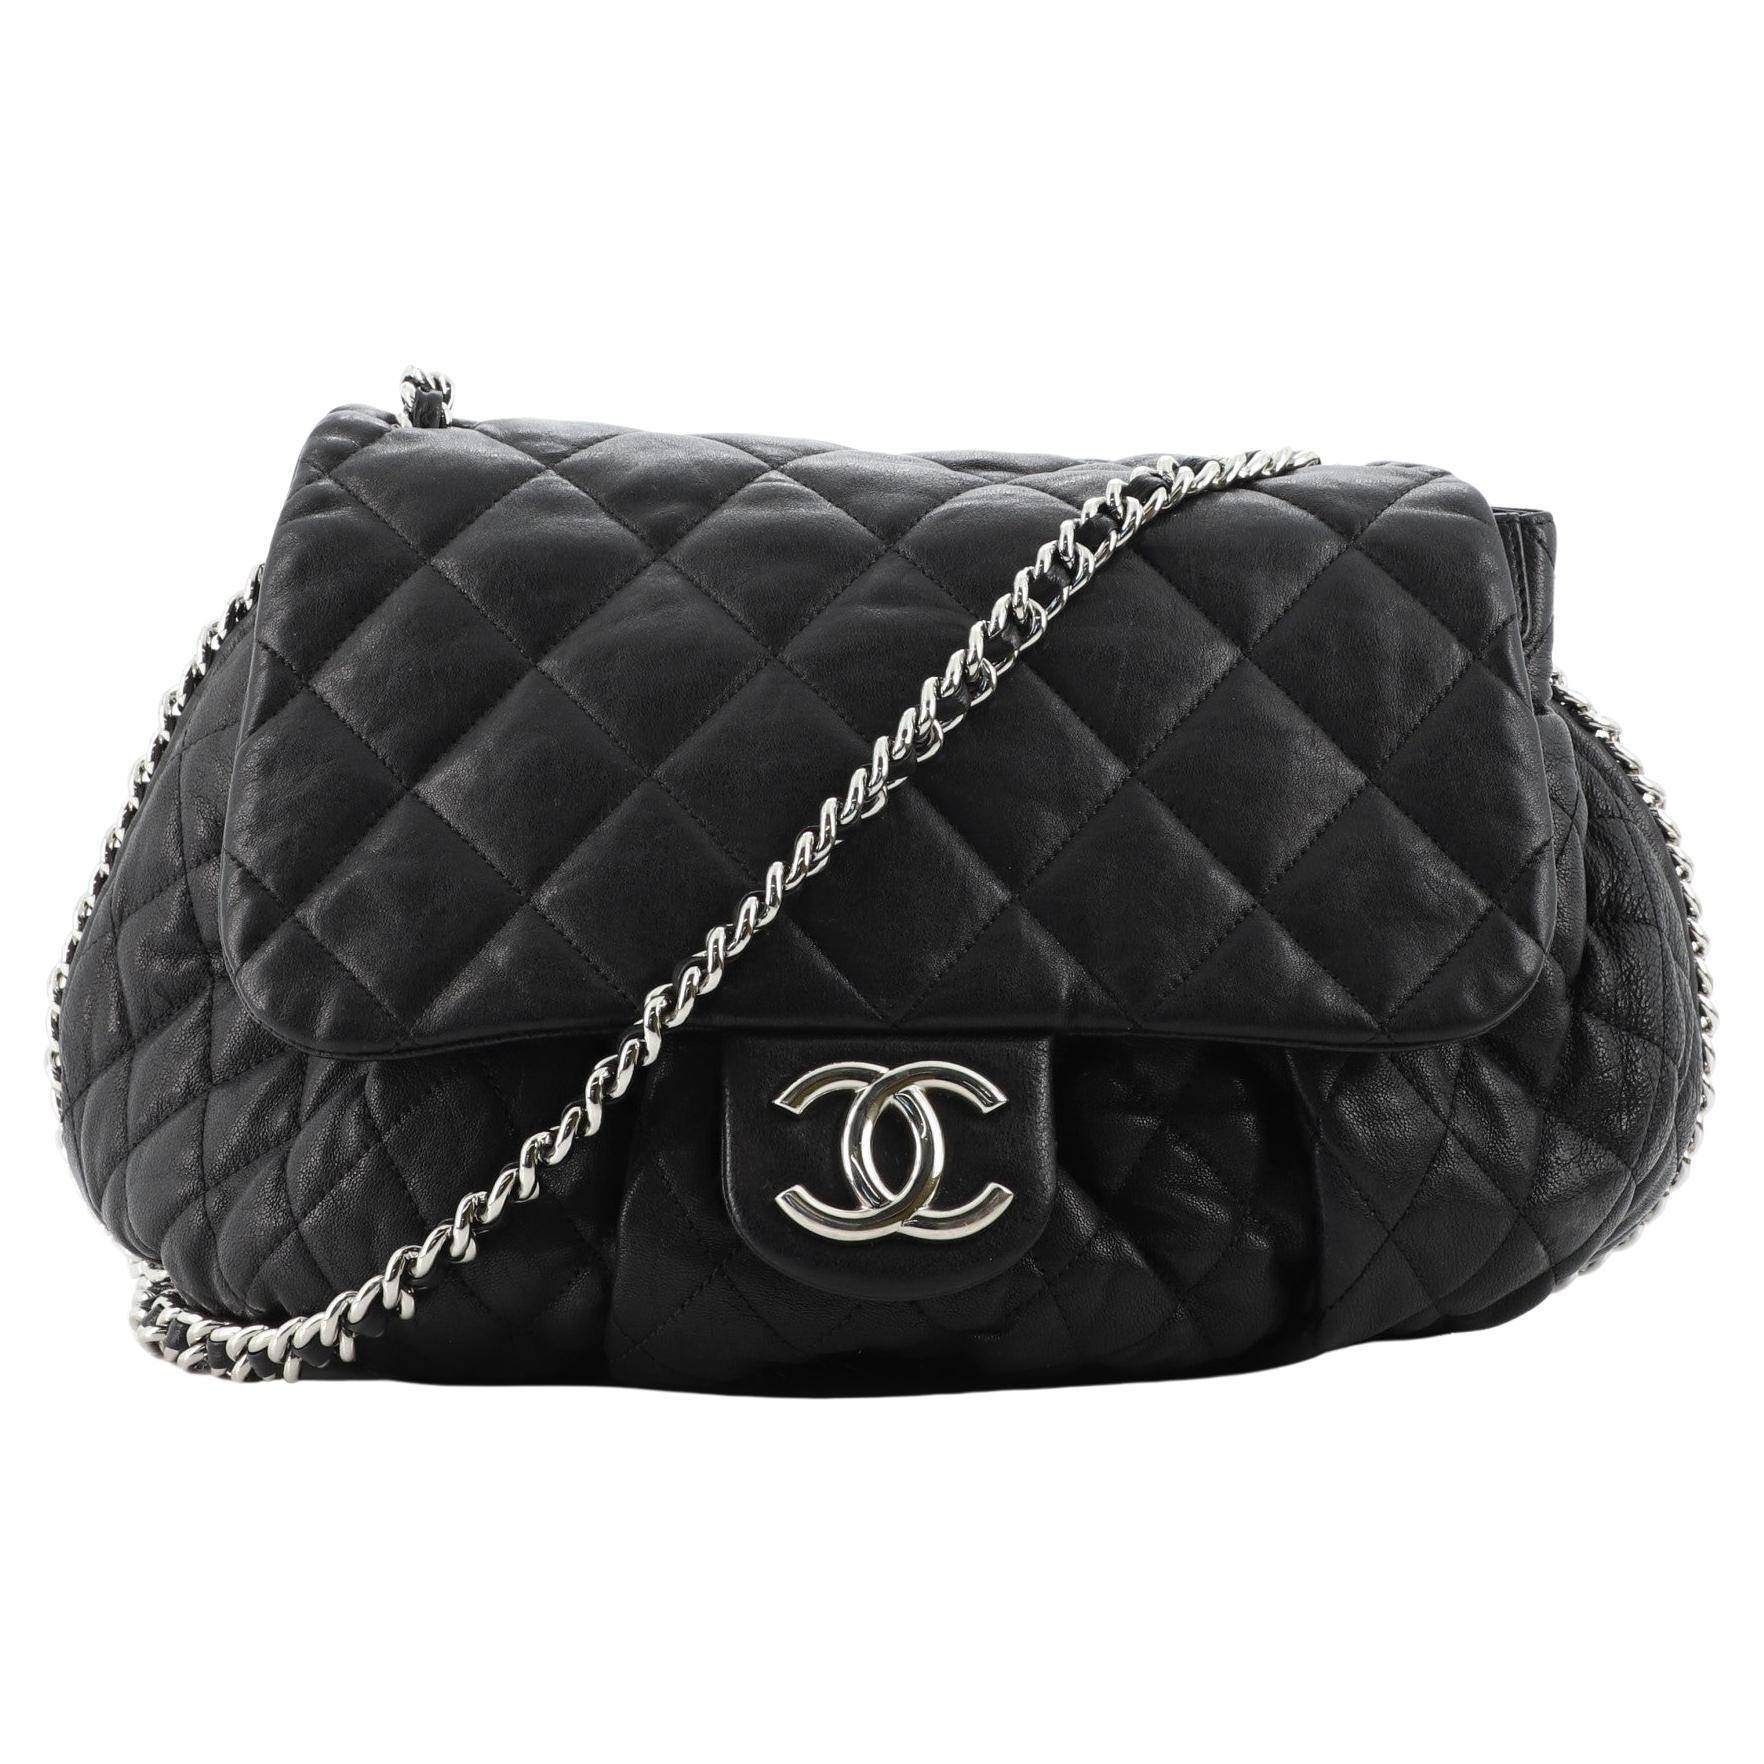 black chanel with silver hardware bag